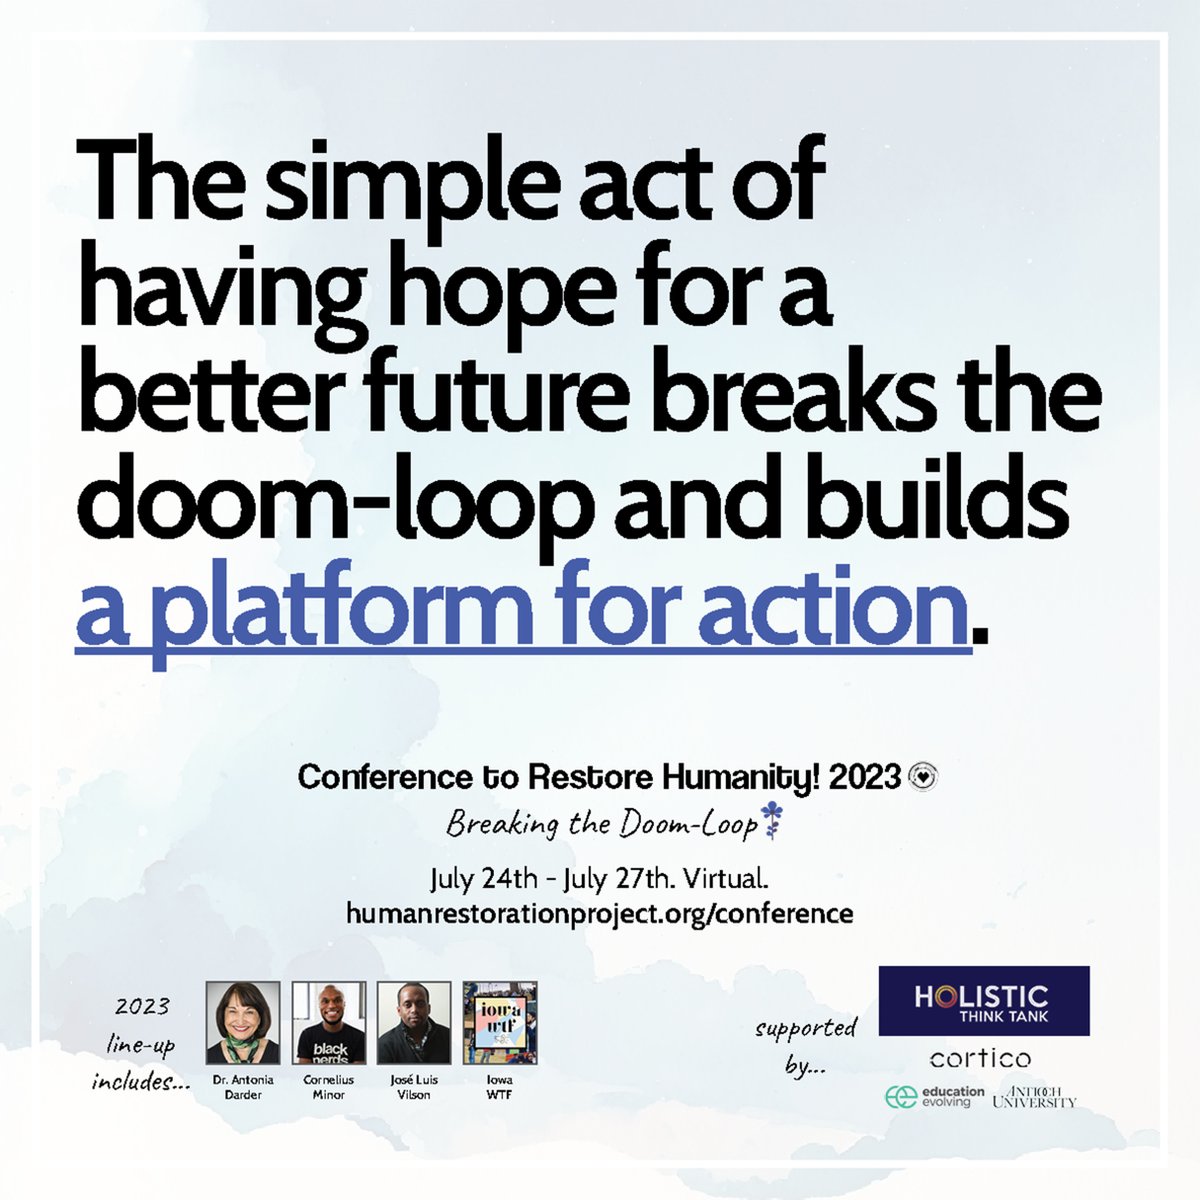 Check out our friends @HumResPro and their upcoming virtual conference! Let's work together to build a better future for education! July 24-27.

Register today: humanrestorationproject.org/conference

#ctrh2023 #reimagineeducation #restorehumanity #teachertwitter #transformingeducation